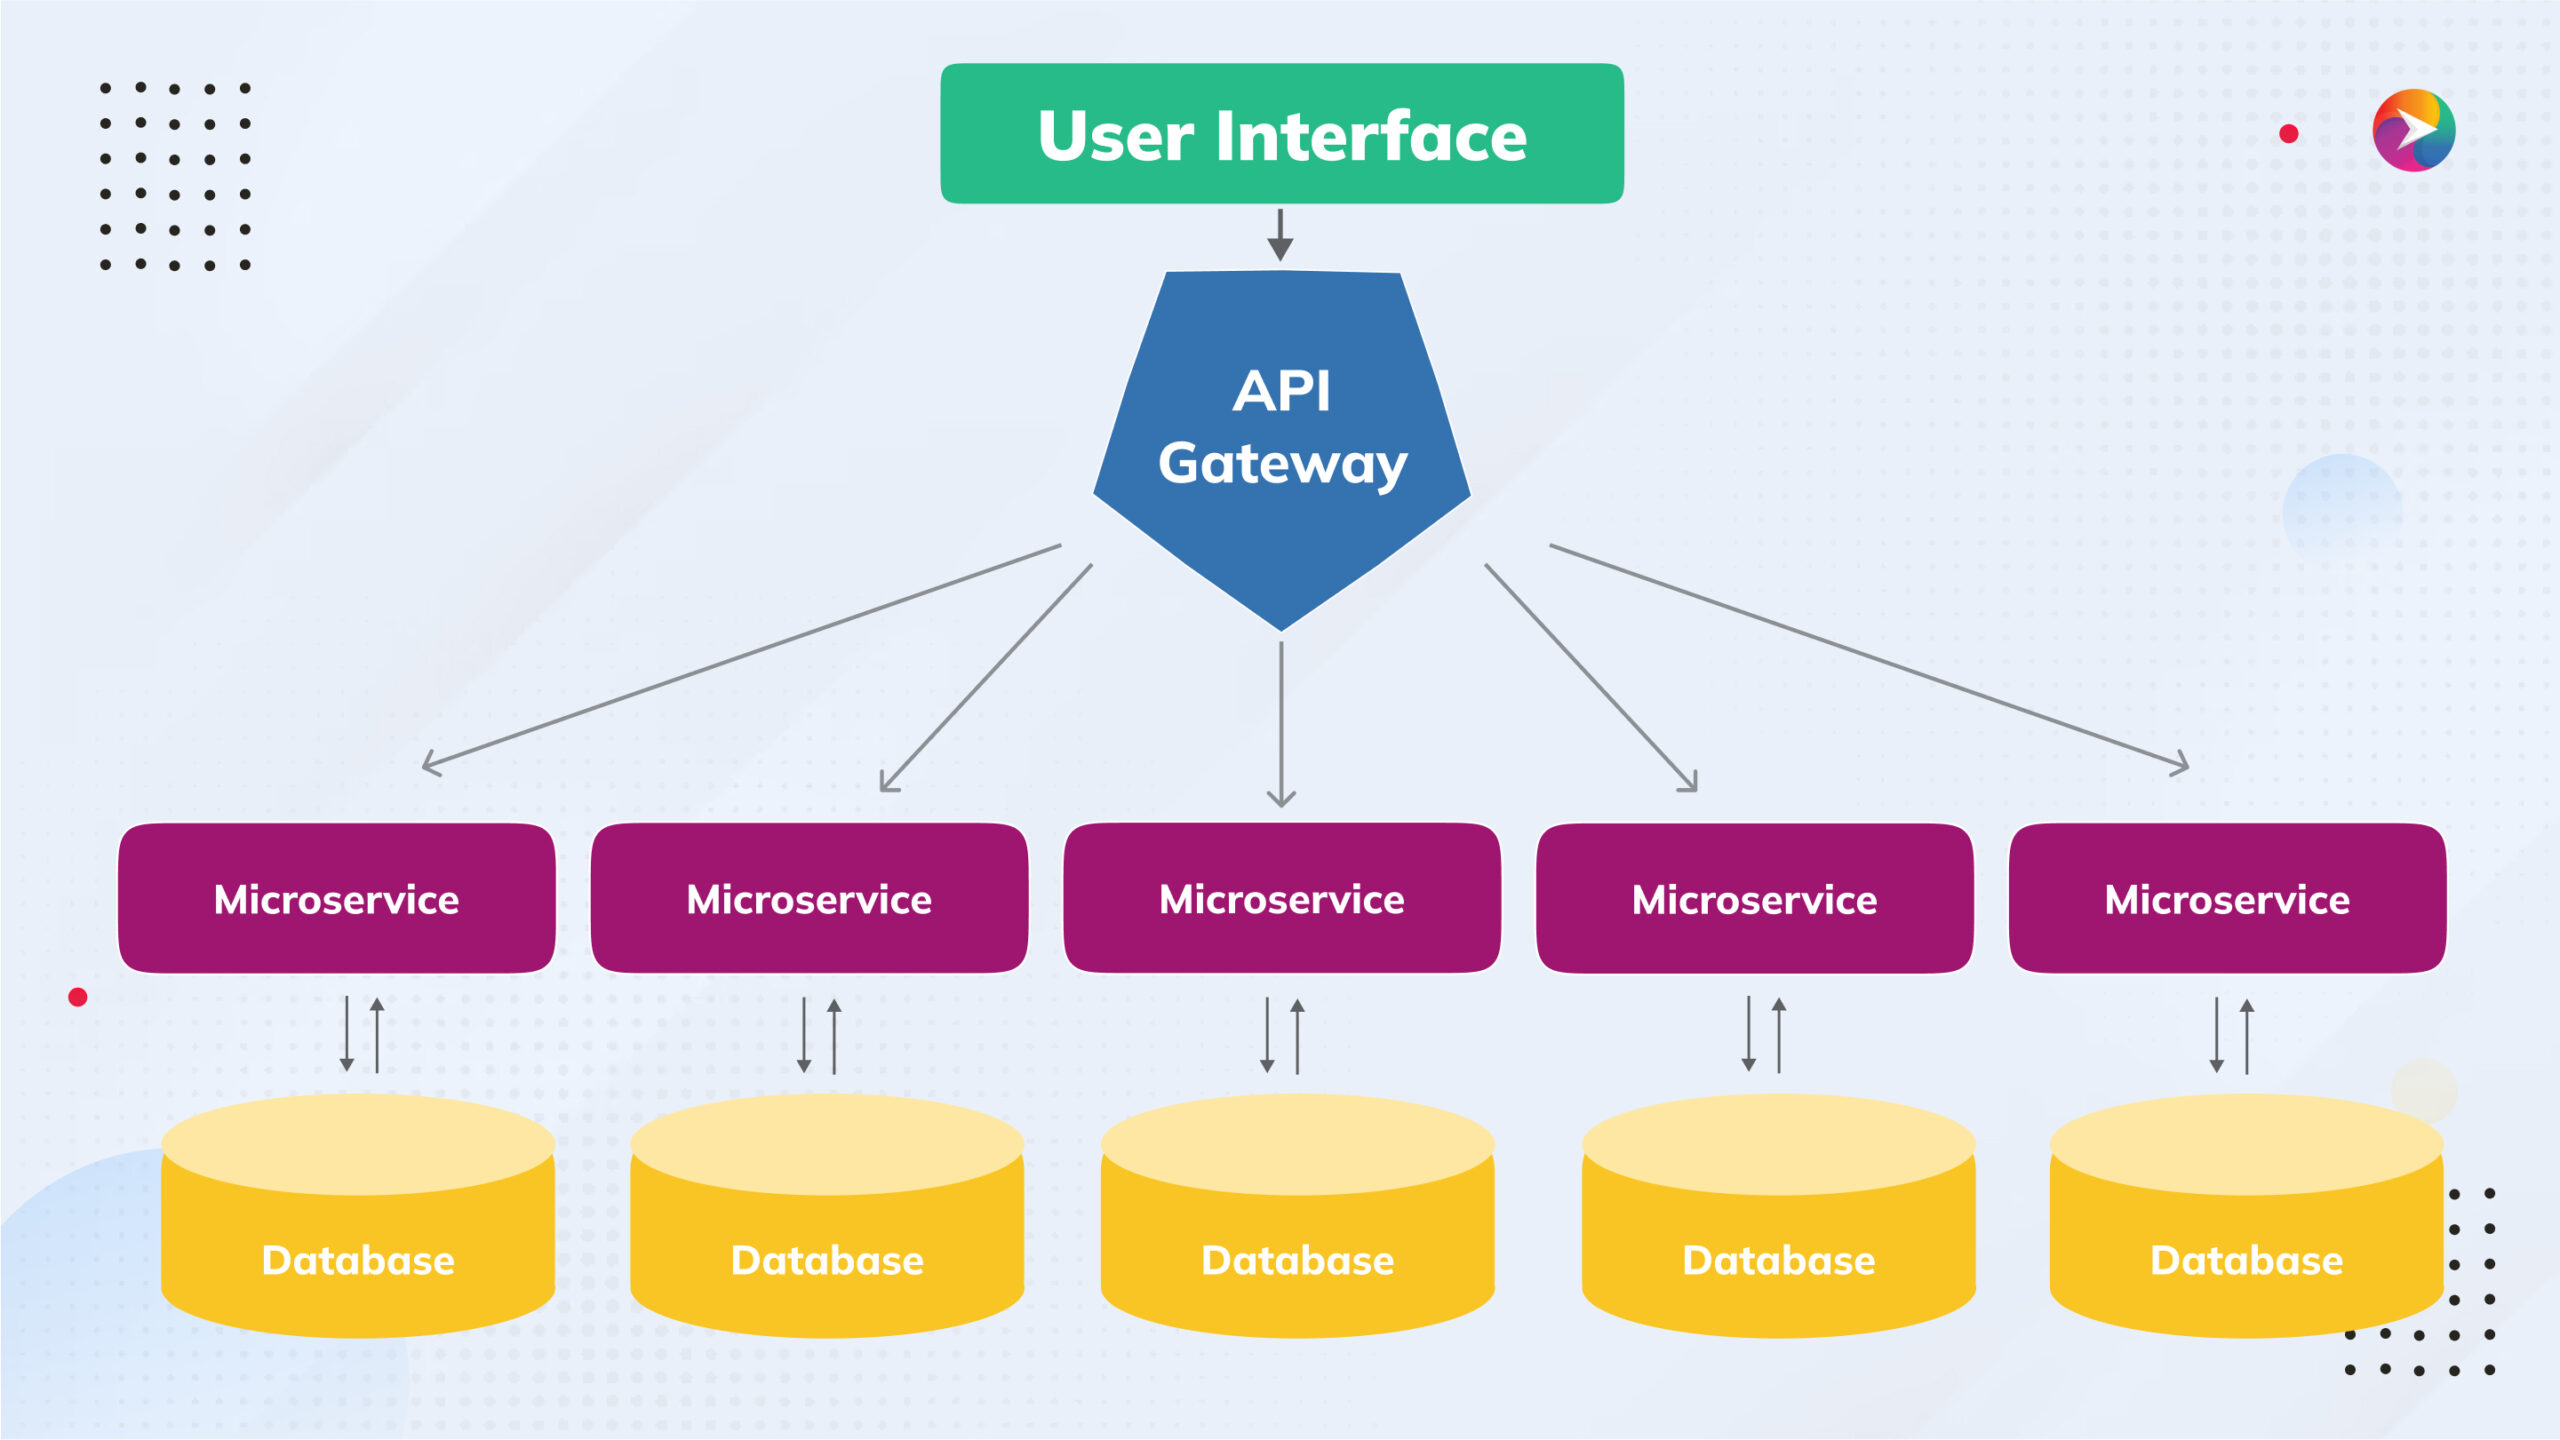 Why Use Microservice Architecture?